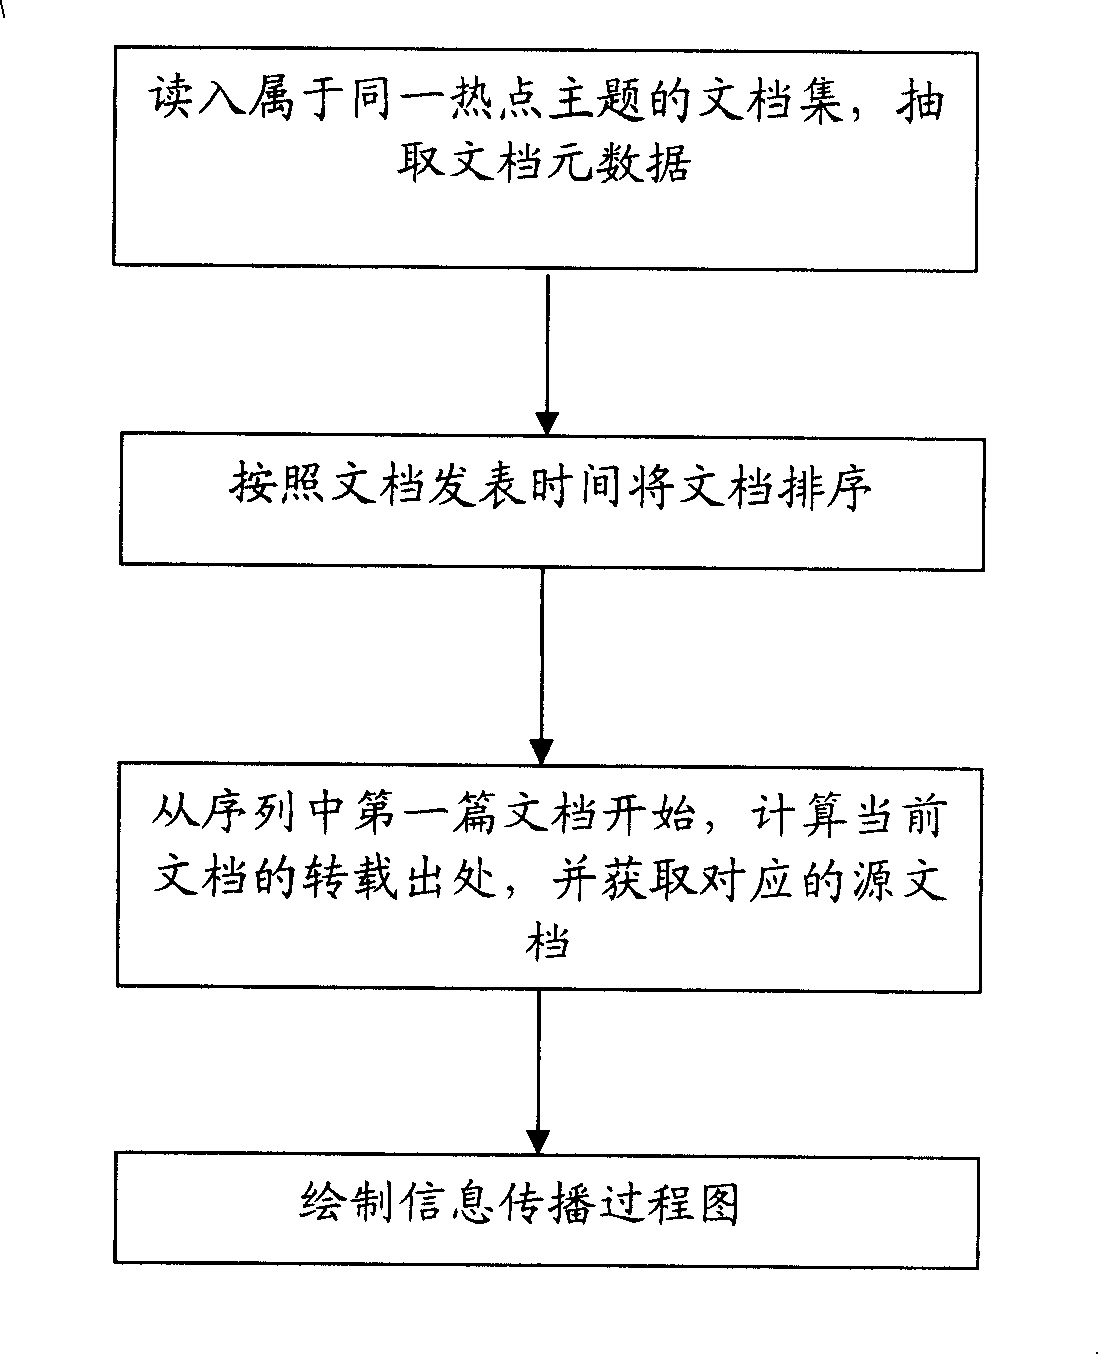 Method and system for automatic analysis of hotspot subject propagation process in the internet